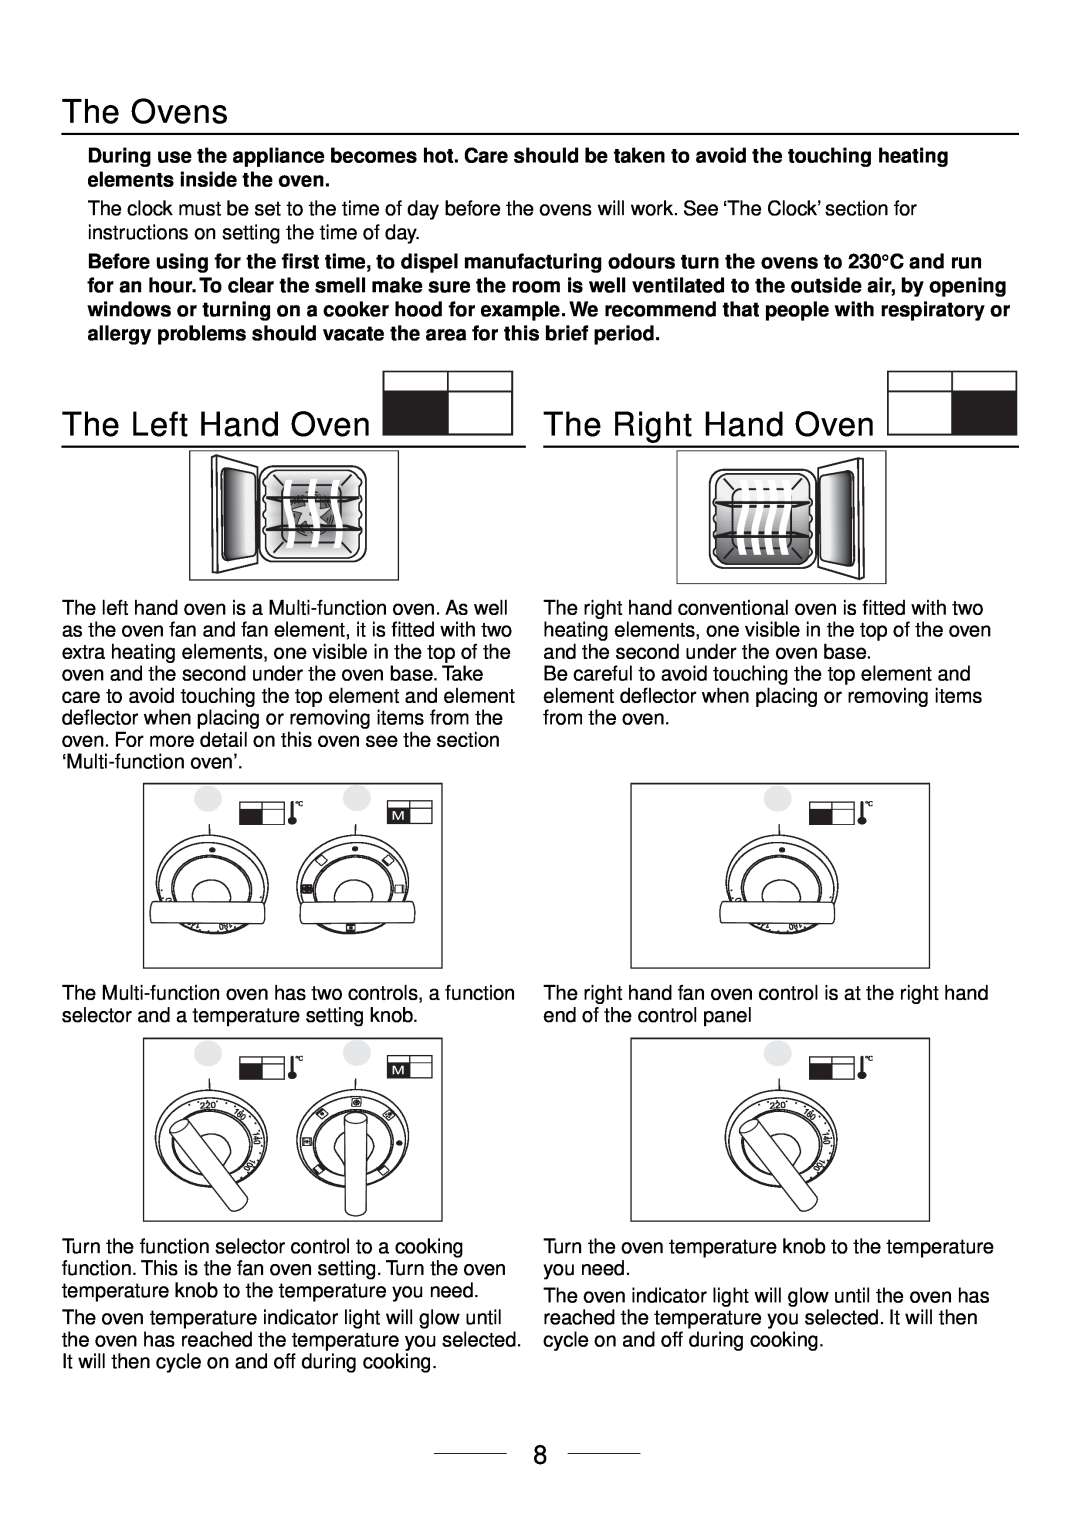 Maytag 110 installation instructions The Ovens, The Left Hand Oven The Right Hand Oven 